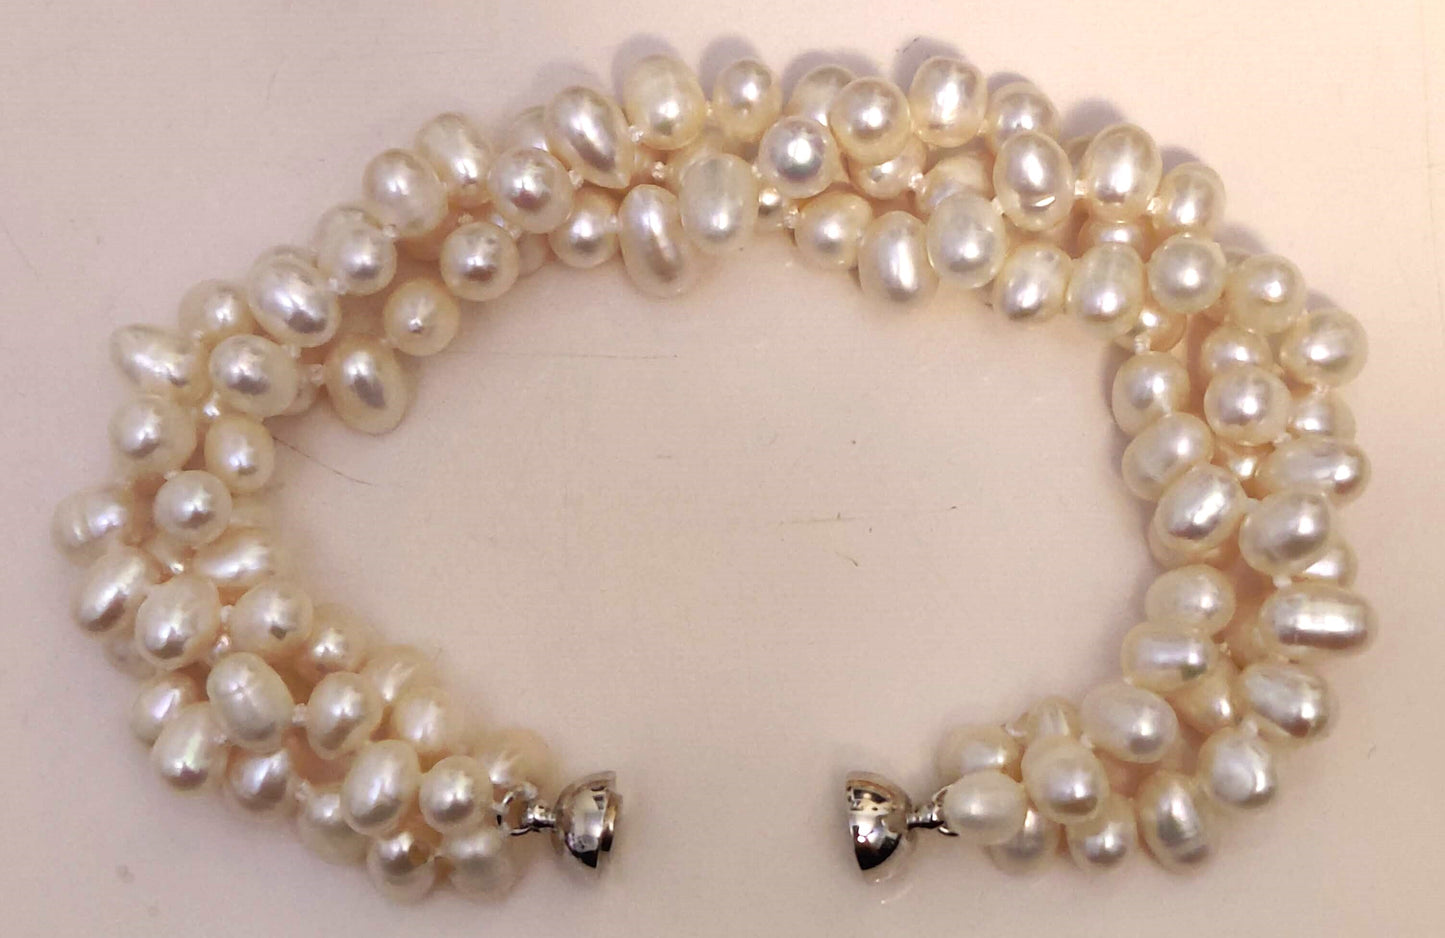 Bracelet Features 3 Rows of High-Luster Cultured AA+ Freshwater Pearls